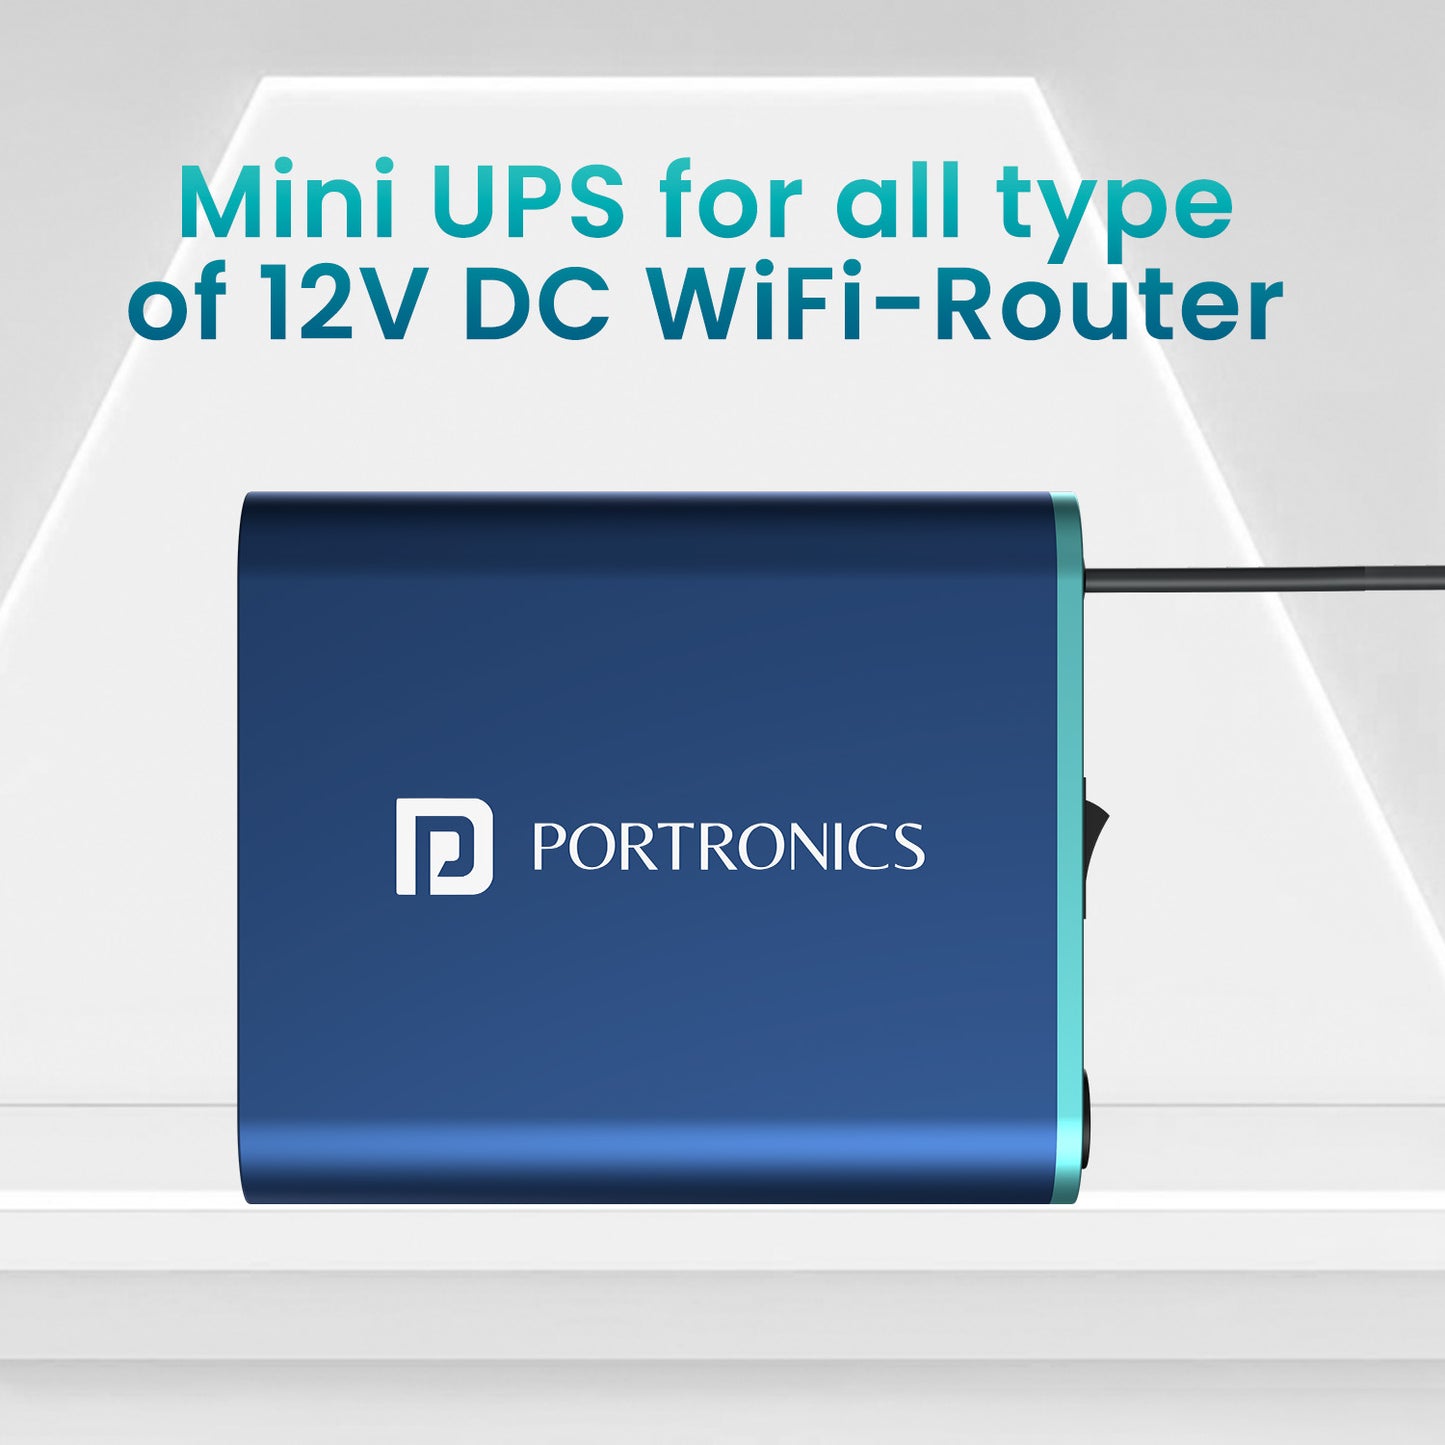 Portronics POWER PLUS 2000mah extended power bank for WiFi router| 12v mini ups support all types of 12v devices. Blue